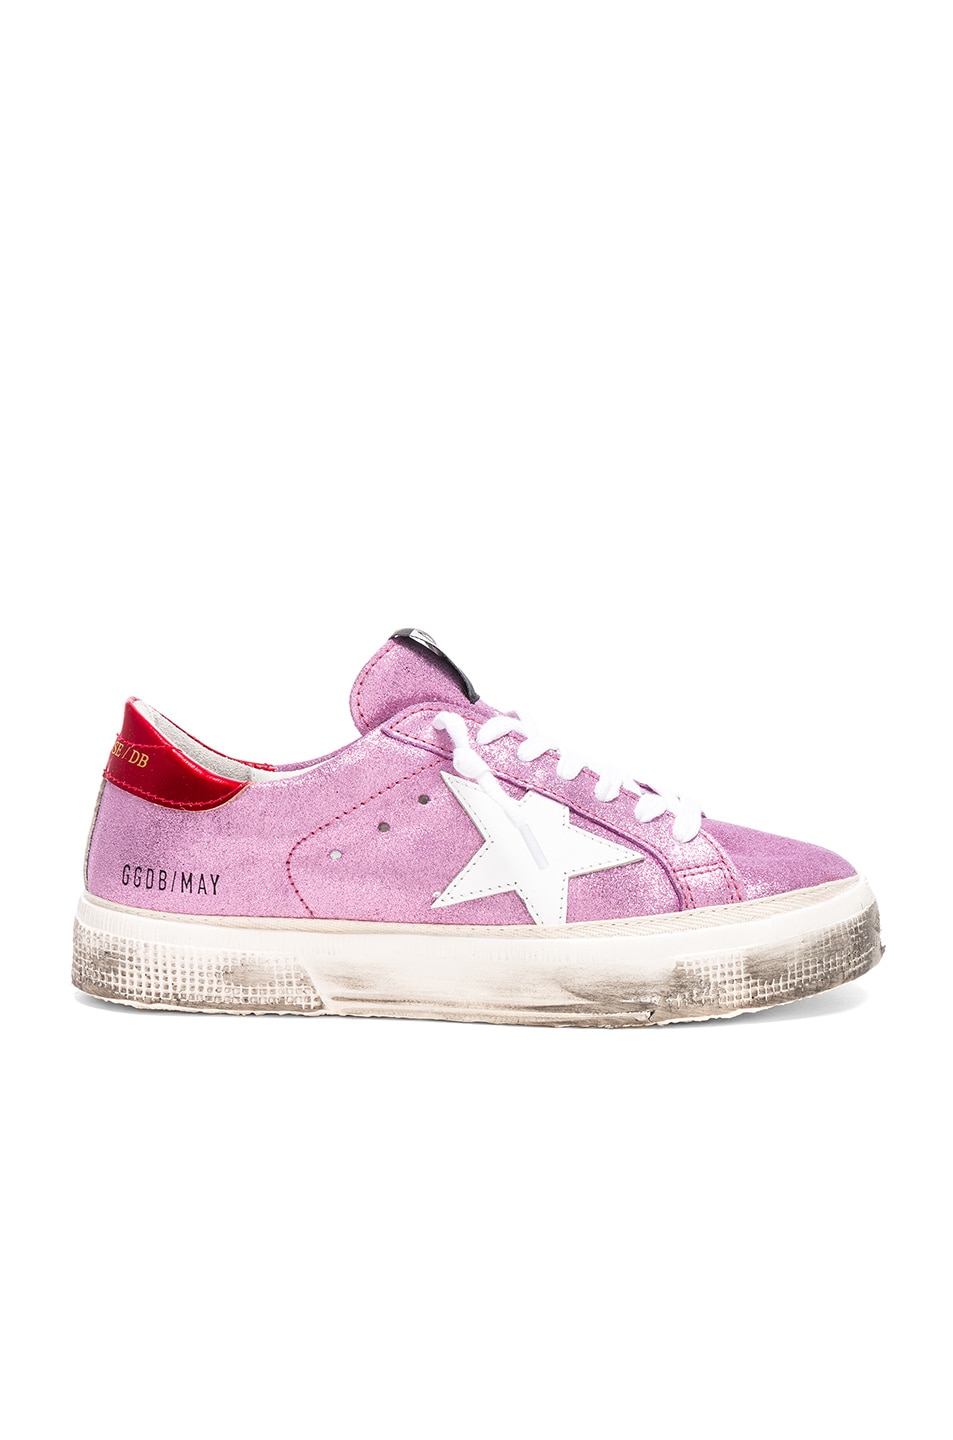 Image 1 of Golden Goose Glitter May Sneakers in Pink Glitter Suede & White Star